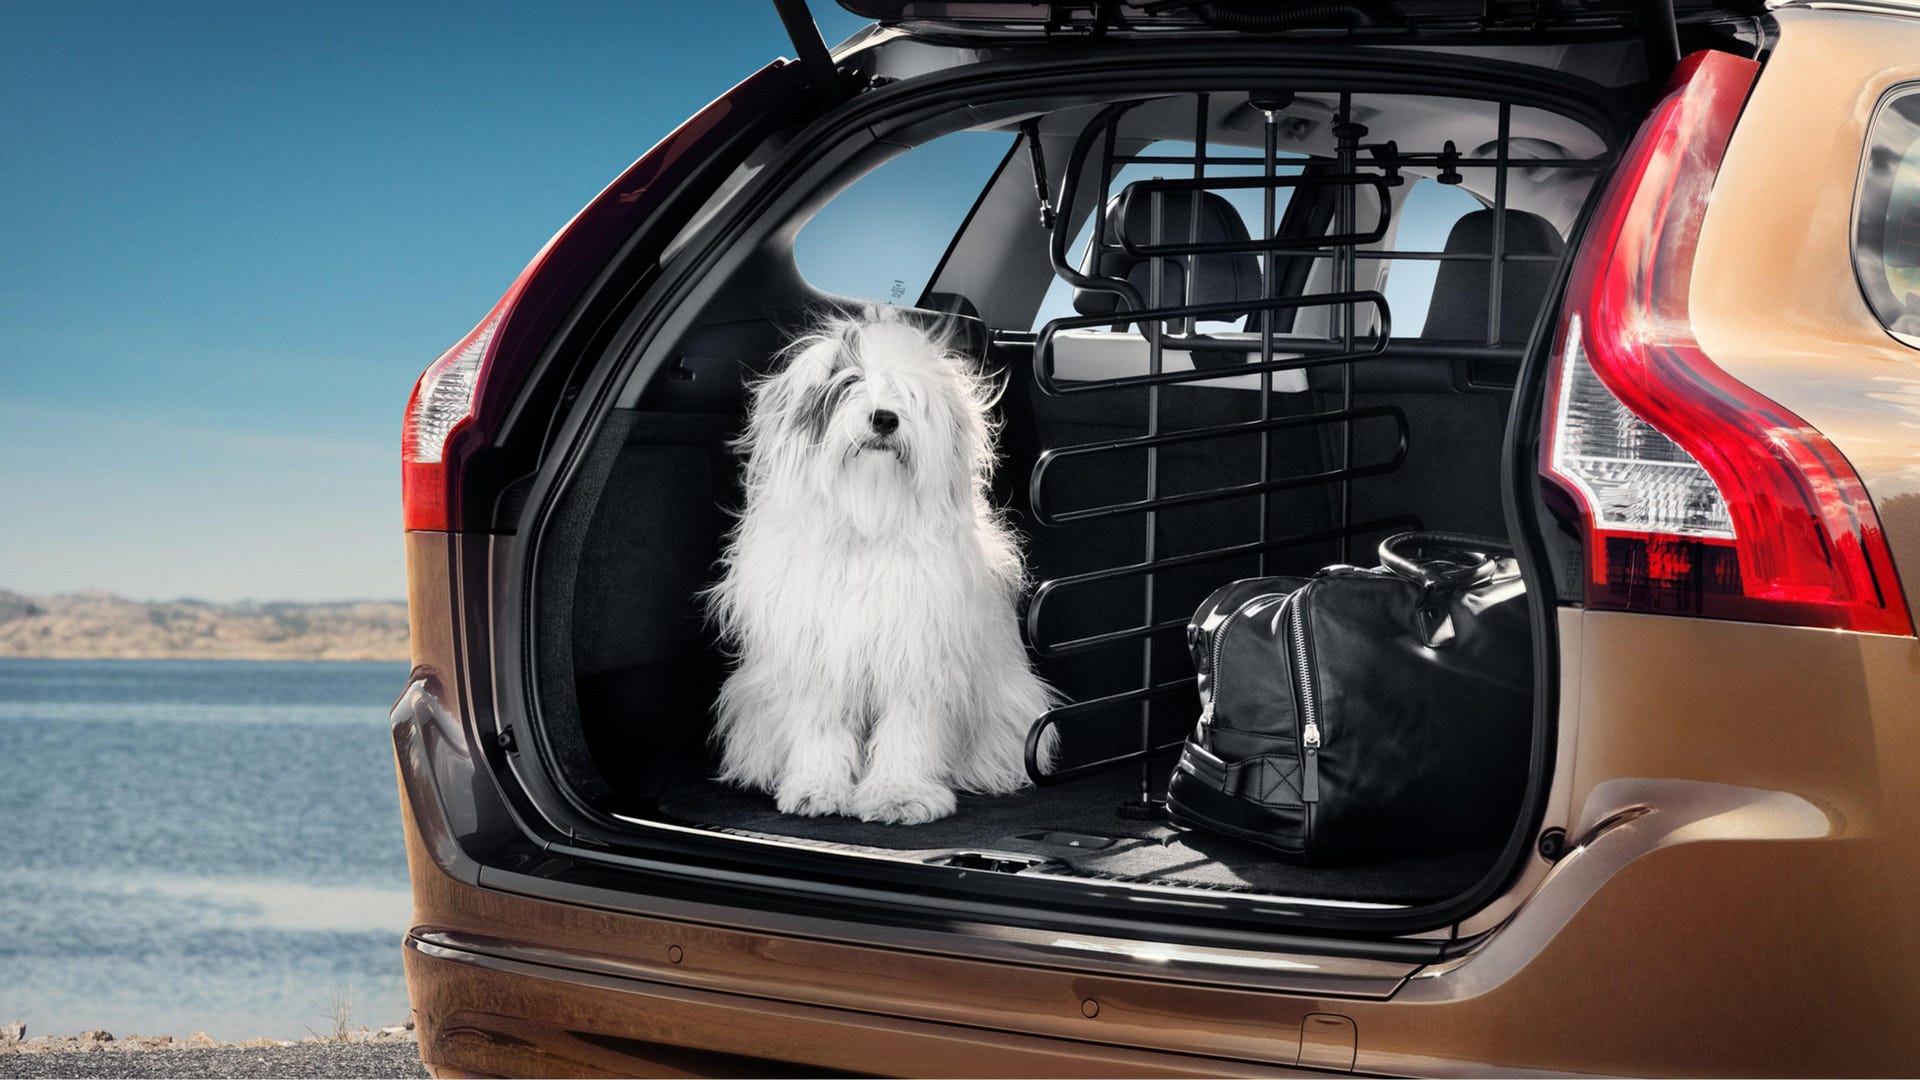 220900-chicago-dogs-find-new-homes-and-can-get-there-safely-thanks-to-volvo-and